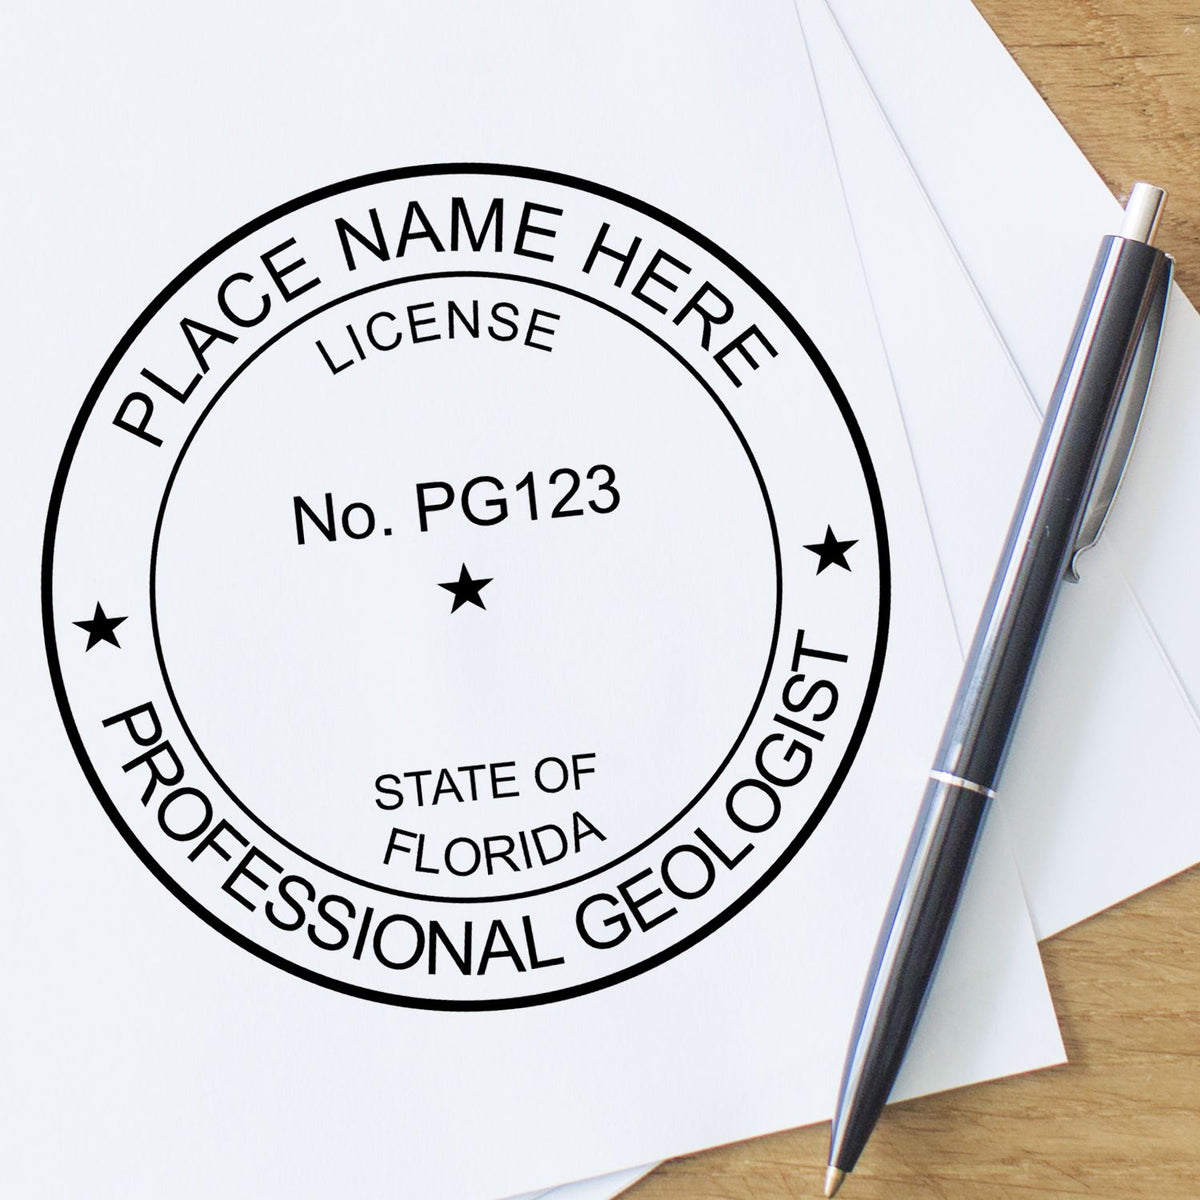 The Florida Professional Geologist Seal Stamp stamp impression comes to life with a crisp, detailed image stamped on paper - showcasing true professional quality.